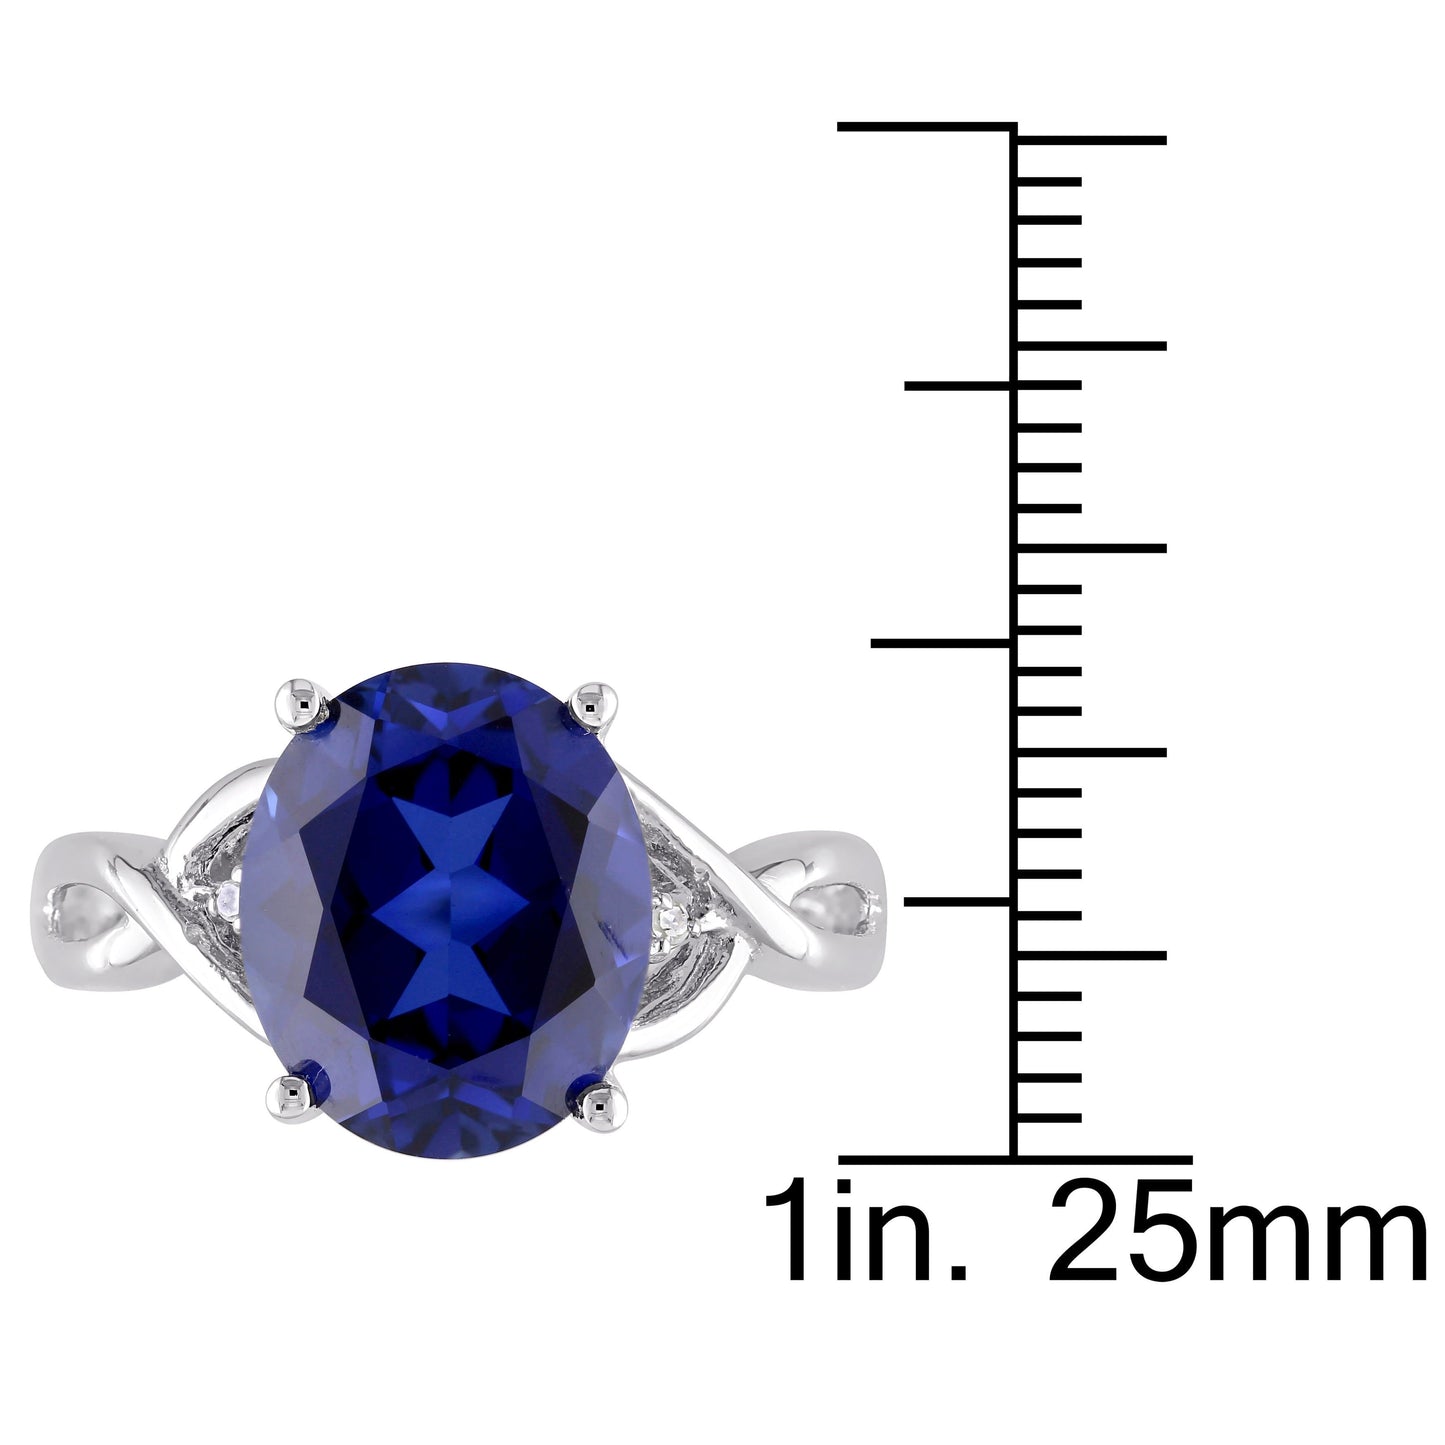 Sophia B 7 1/2ct Created Blue Sapphire Ring with Diamond Accents